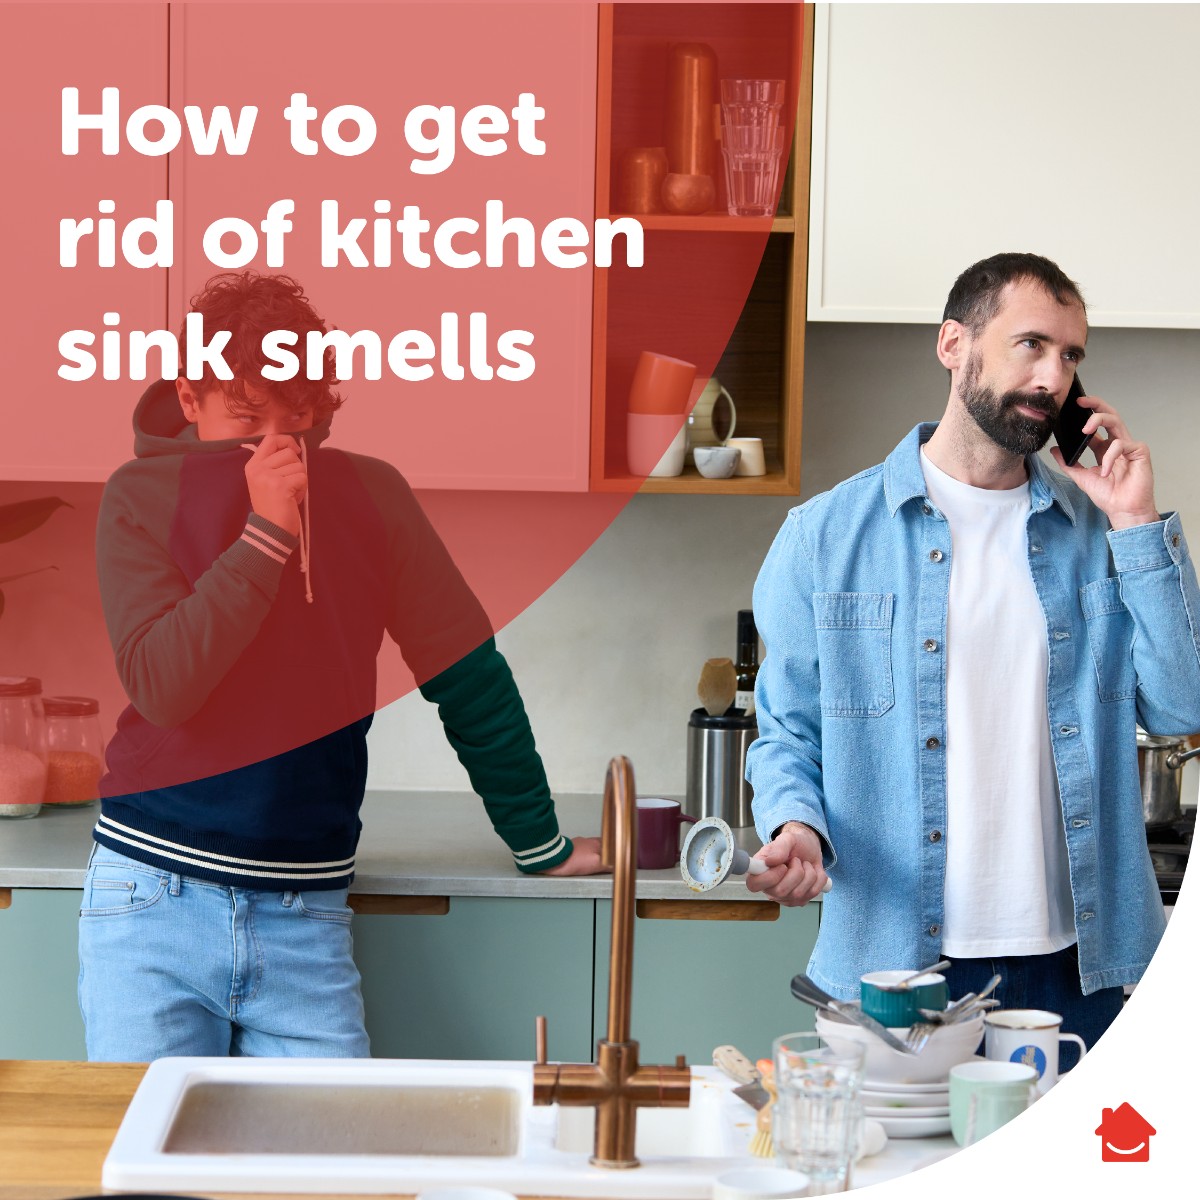 Kitchen sink kicking up a stink? Here's some hints and tips to save your noses 👃. brnw.ch/21wHSjG